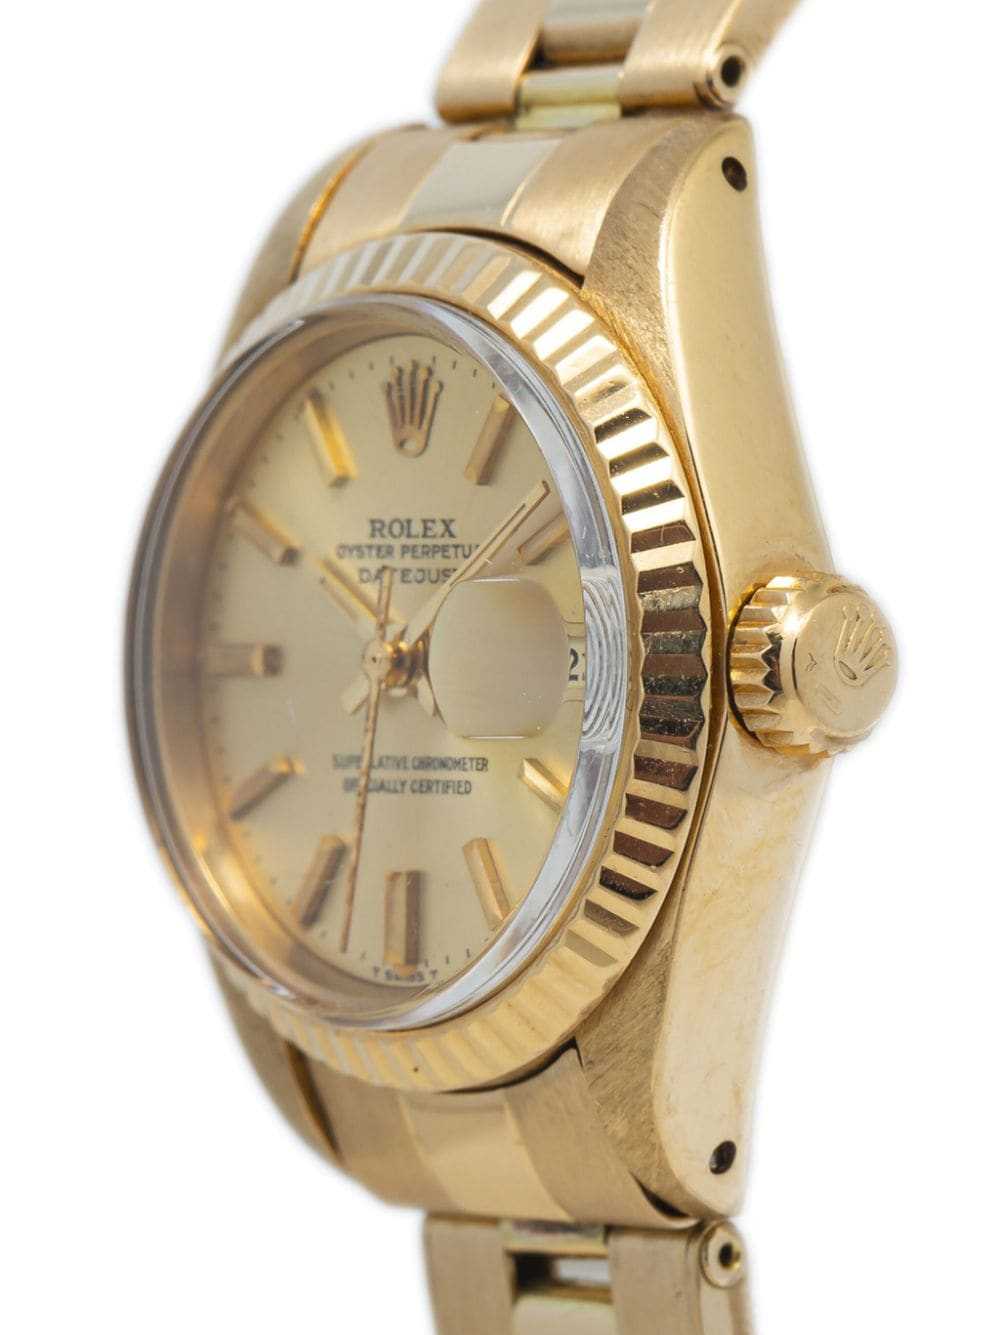 Rolex pre-owned Datejust 26mm - Gold - image 3